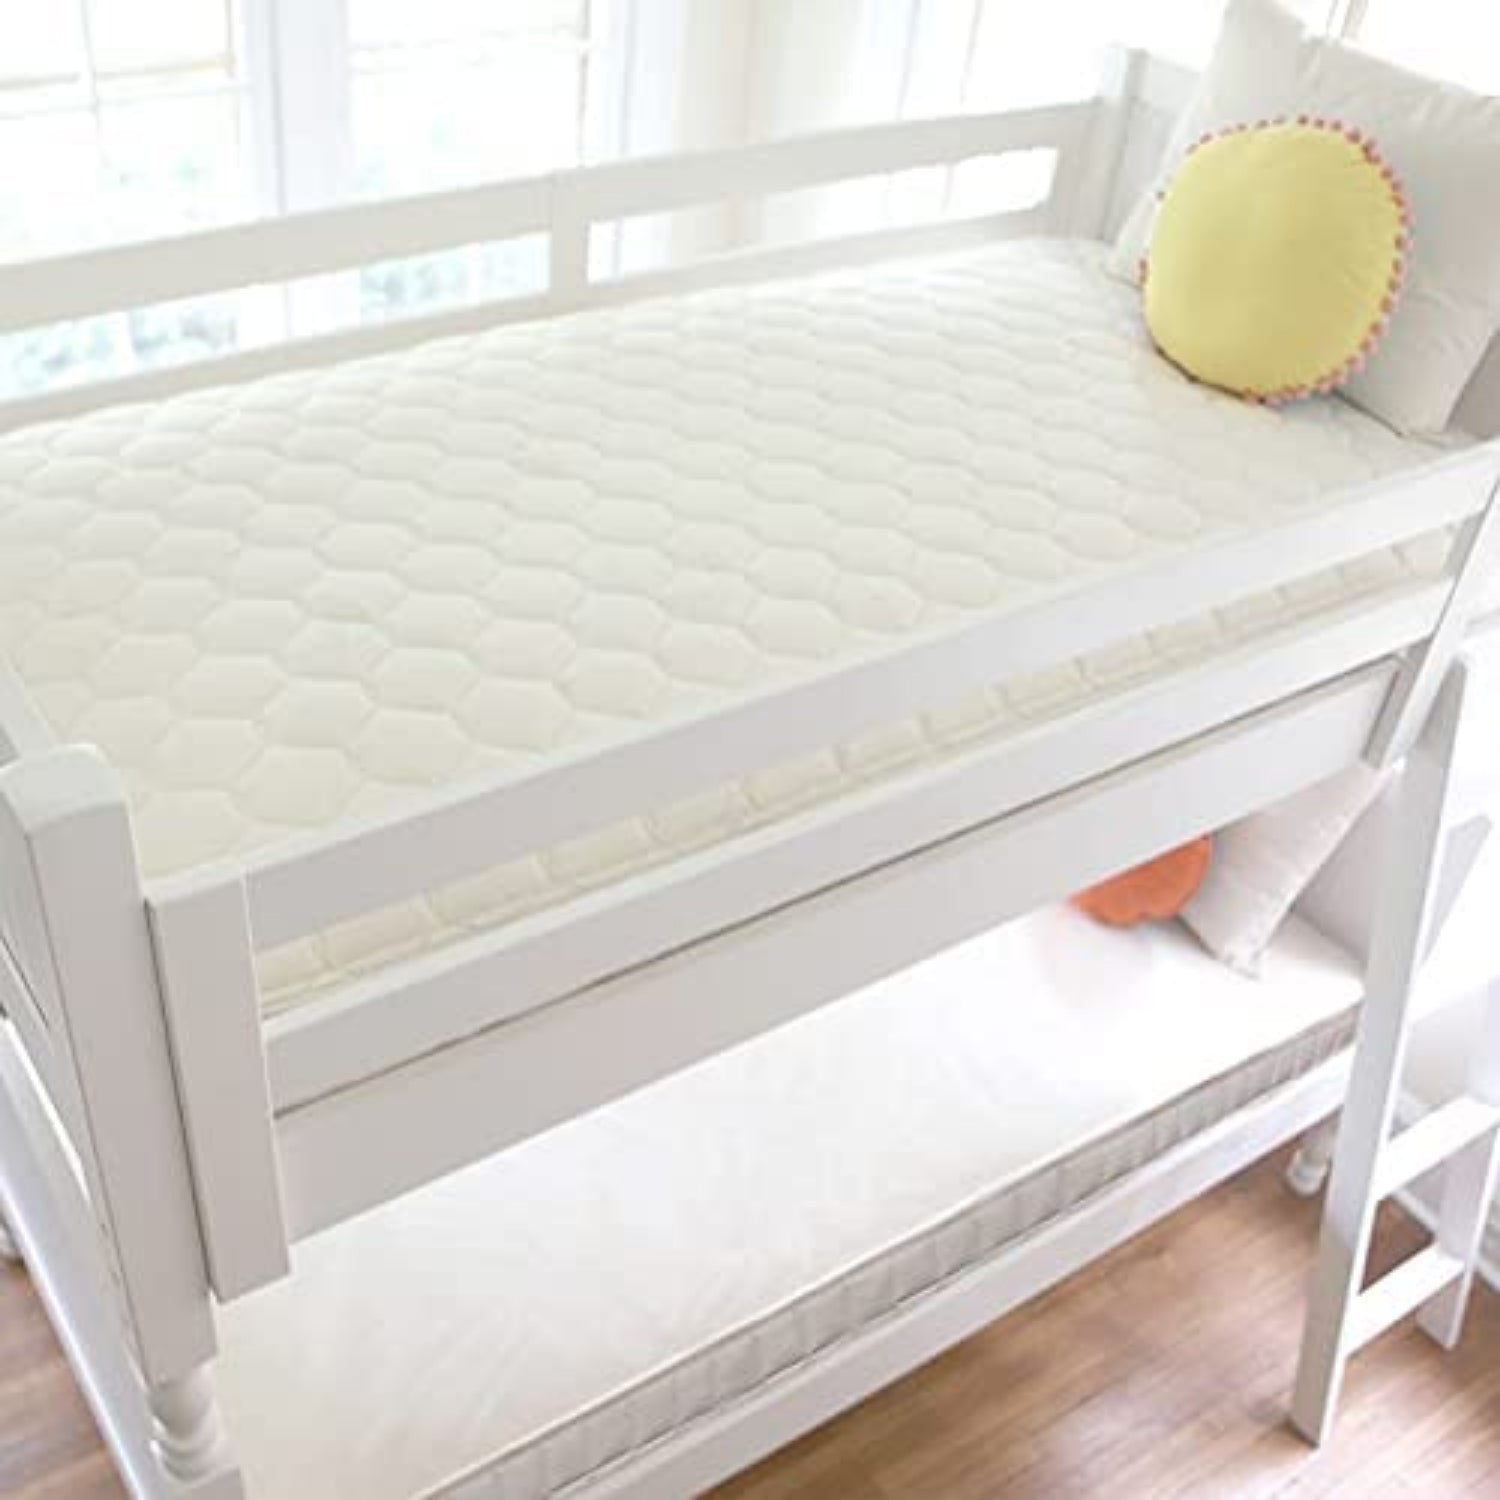 Naturepedic 2-in-1 Organic Kids Mattress, Natural Mattress with Quilted Top and Waterproof Layer, No